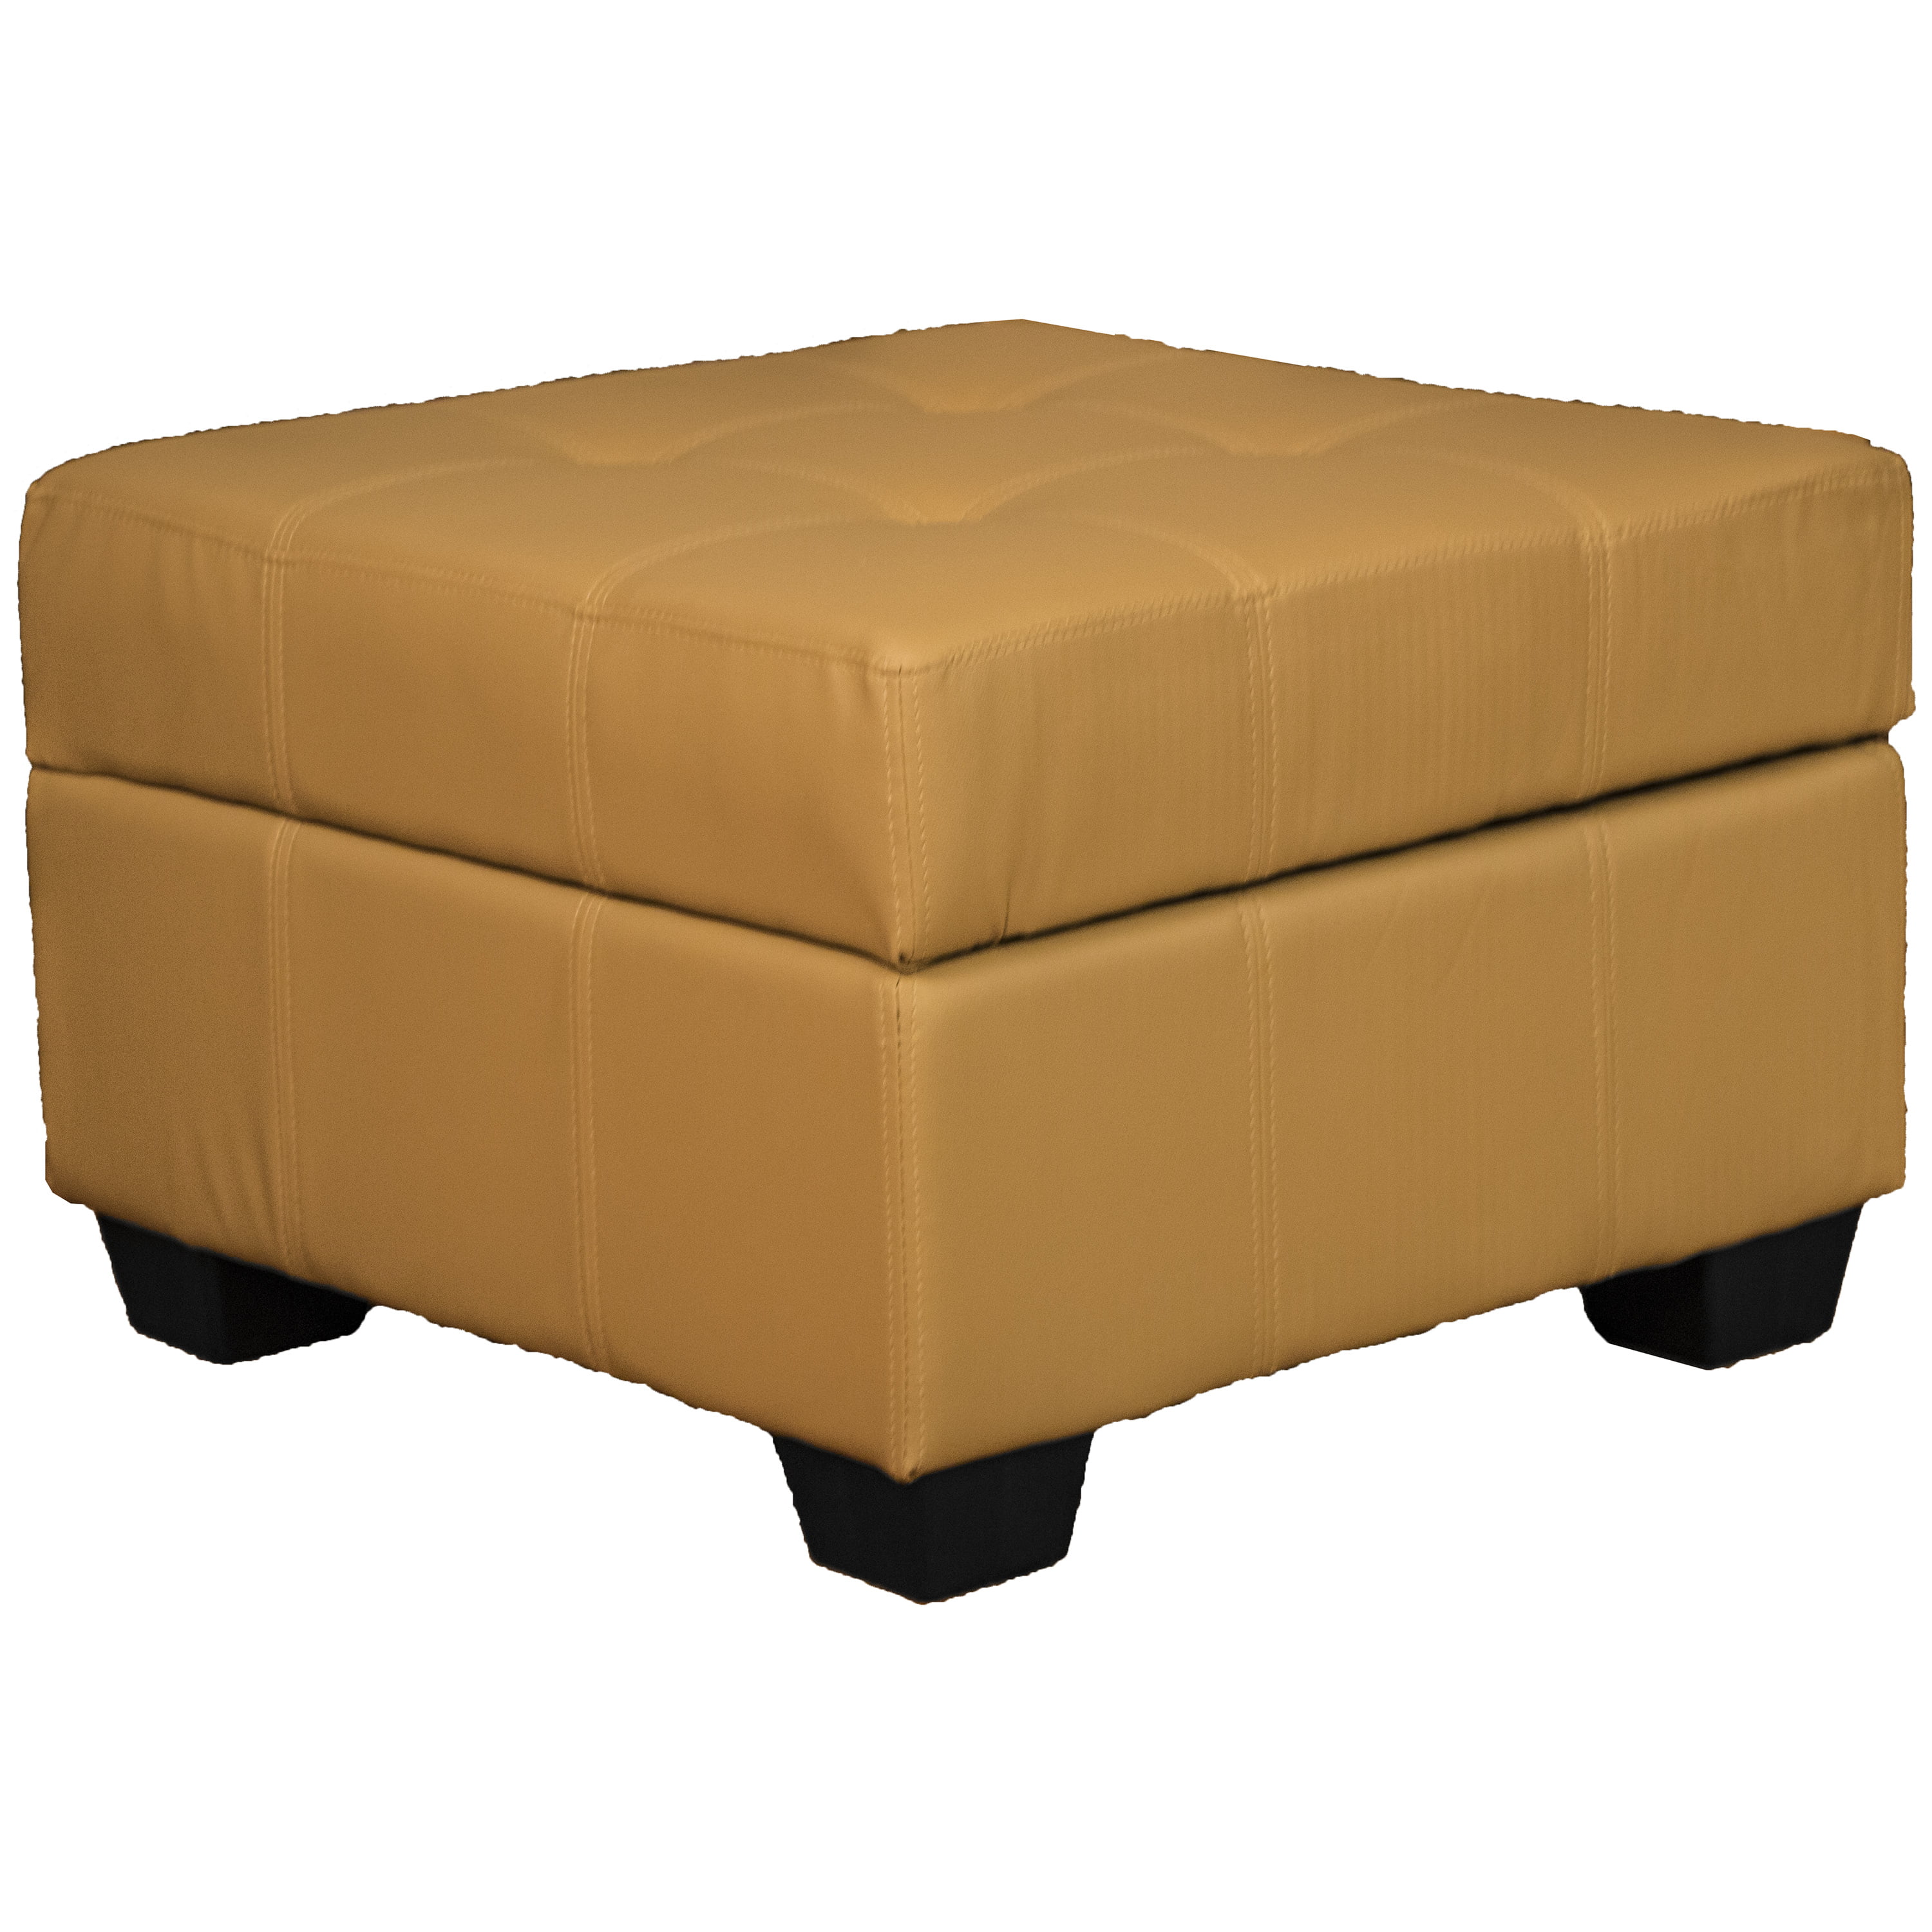 Timeless 24 Inch Square Tufted Padded Hinged Storage